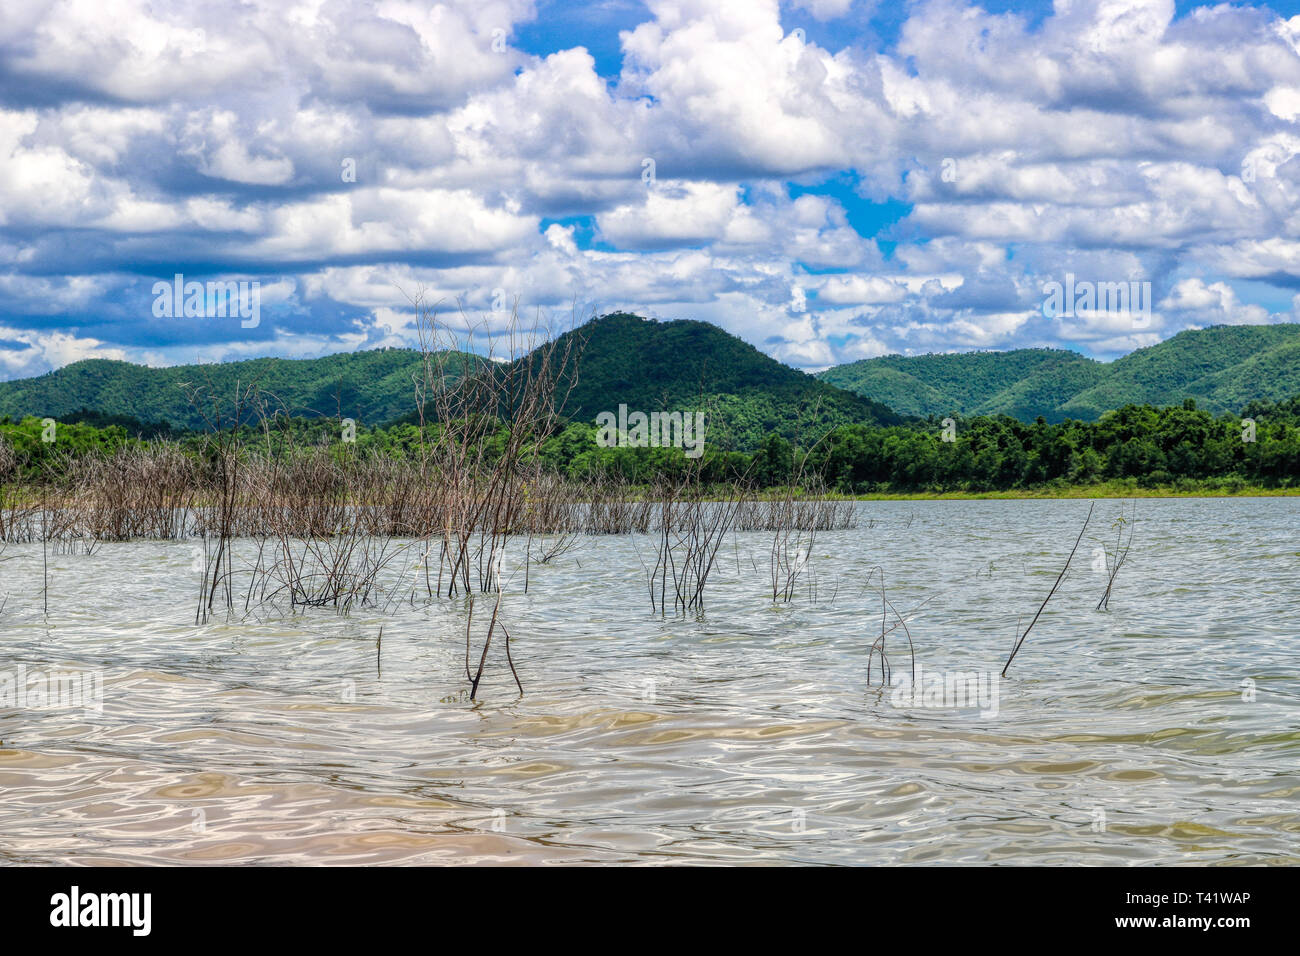 This unique picture shows the beautiful nature with hills and trees and the great reservoir in the Kaeng Krachan National Park in Thailand Stock Photo